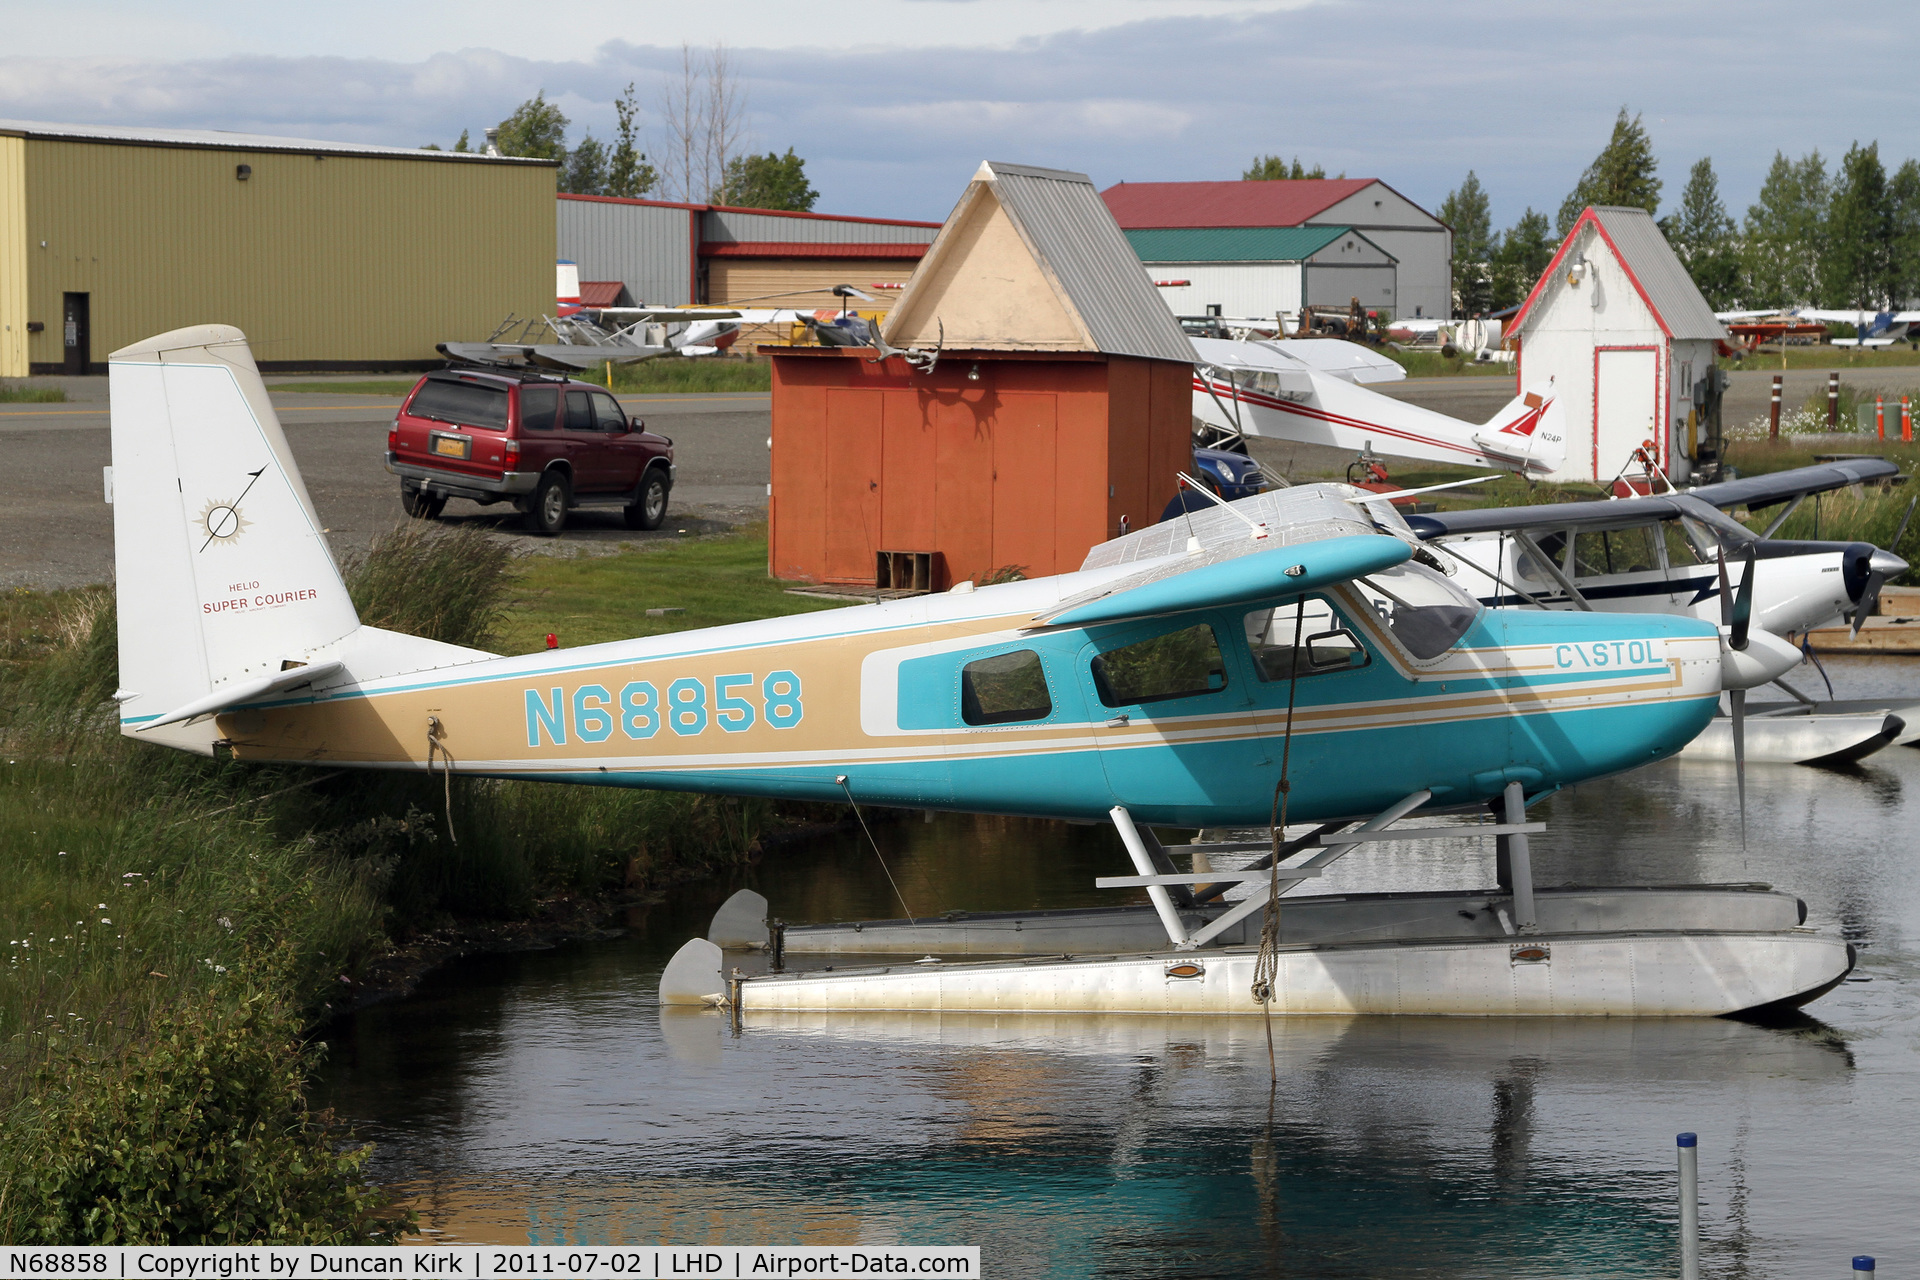 N68858, 1973 Helio H-295-1400 Super Courier C/N 1464, Helio on floats.